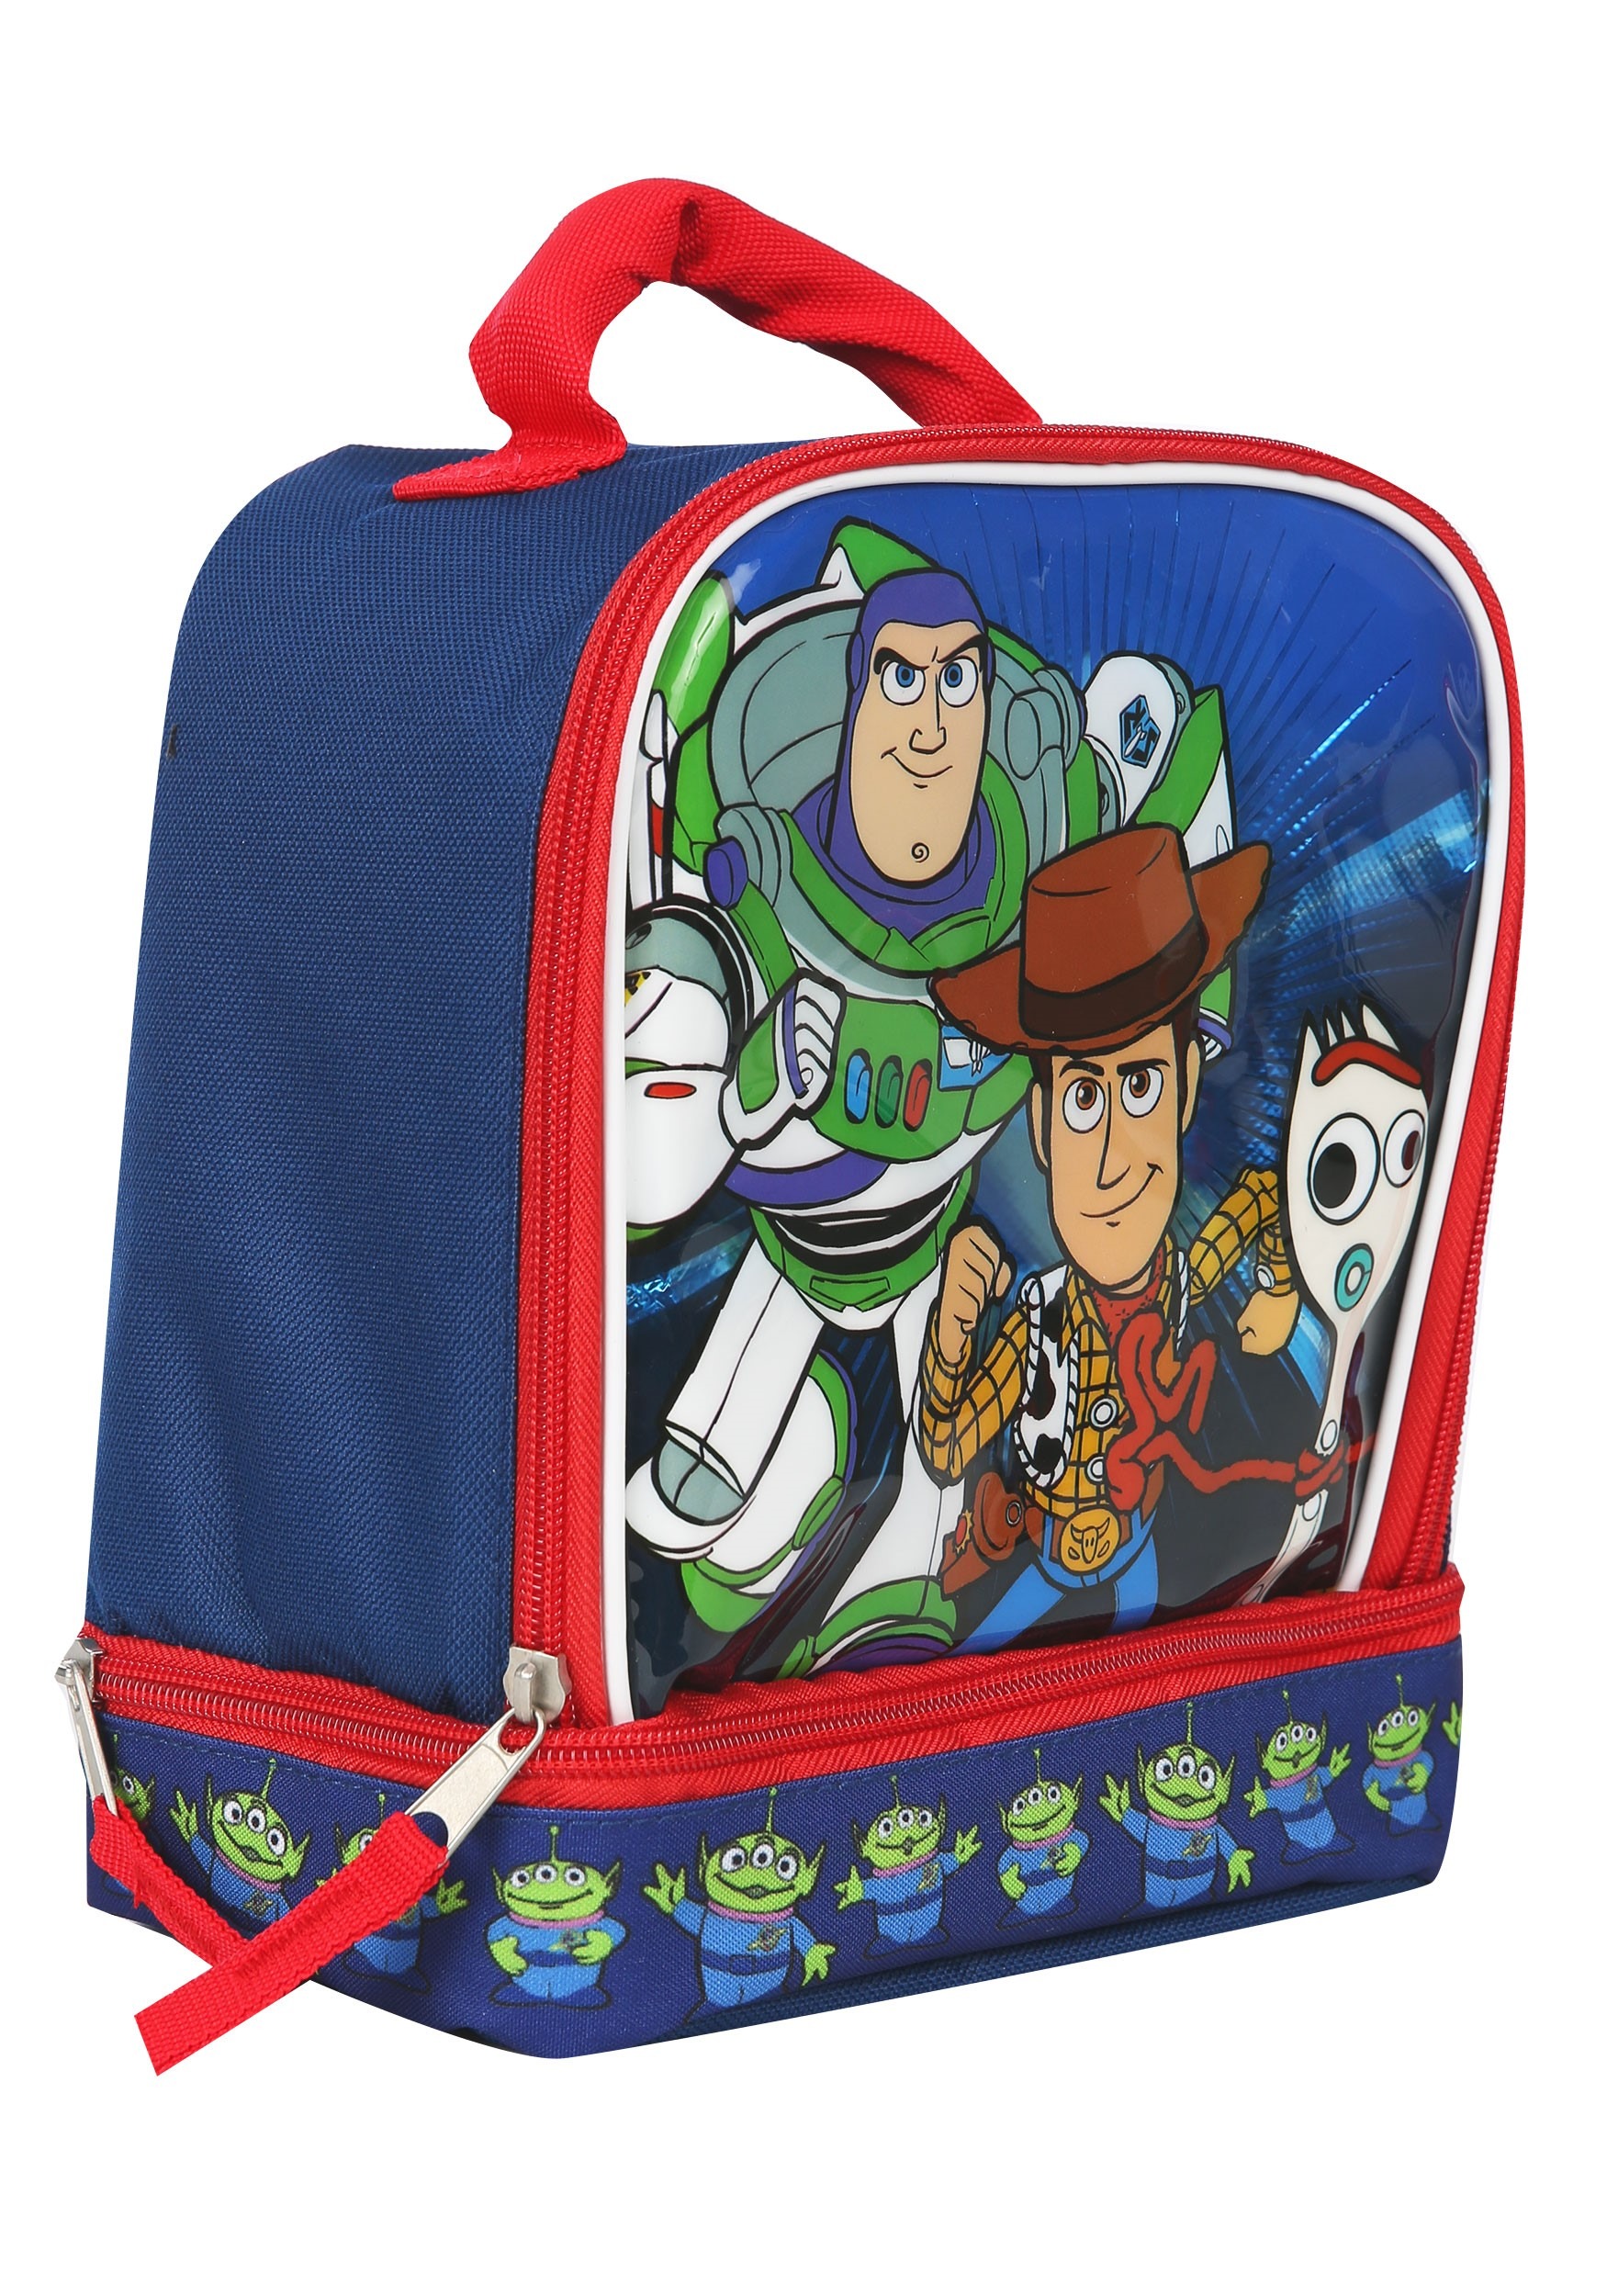 https://images.fun.com/products/61540/2-1-137214/toy-story-dome-lunch-bag-alt-1.jpg